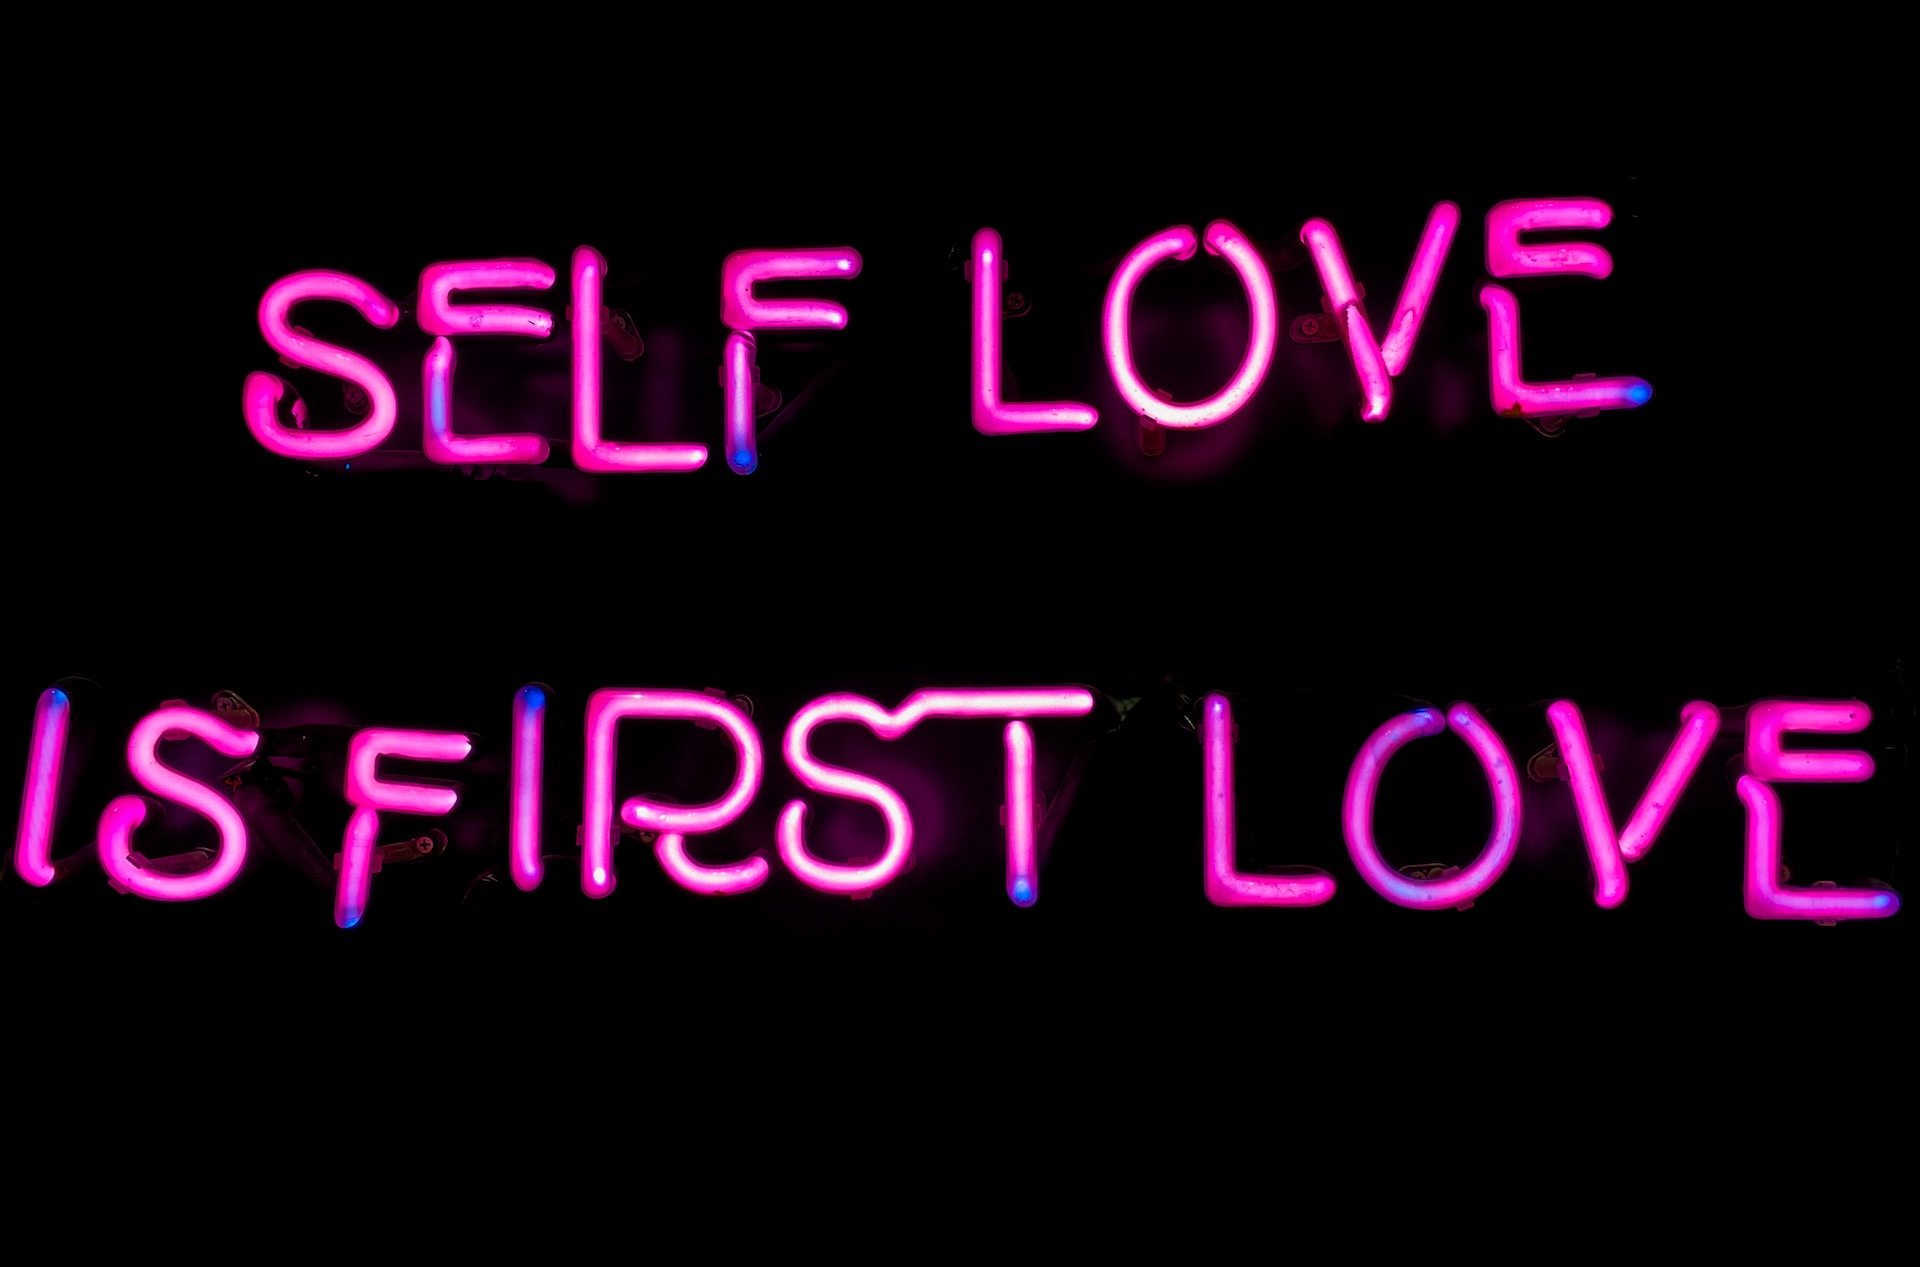 Néons roses qui forment la phrase Self Love is First Love